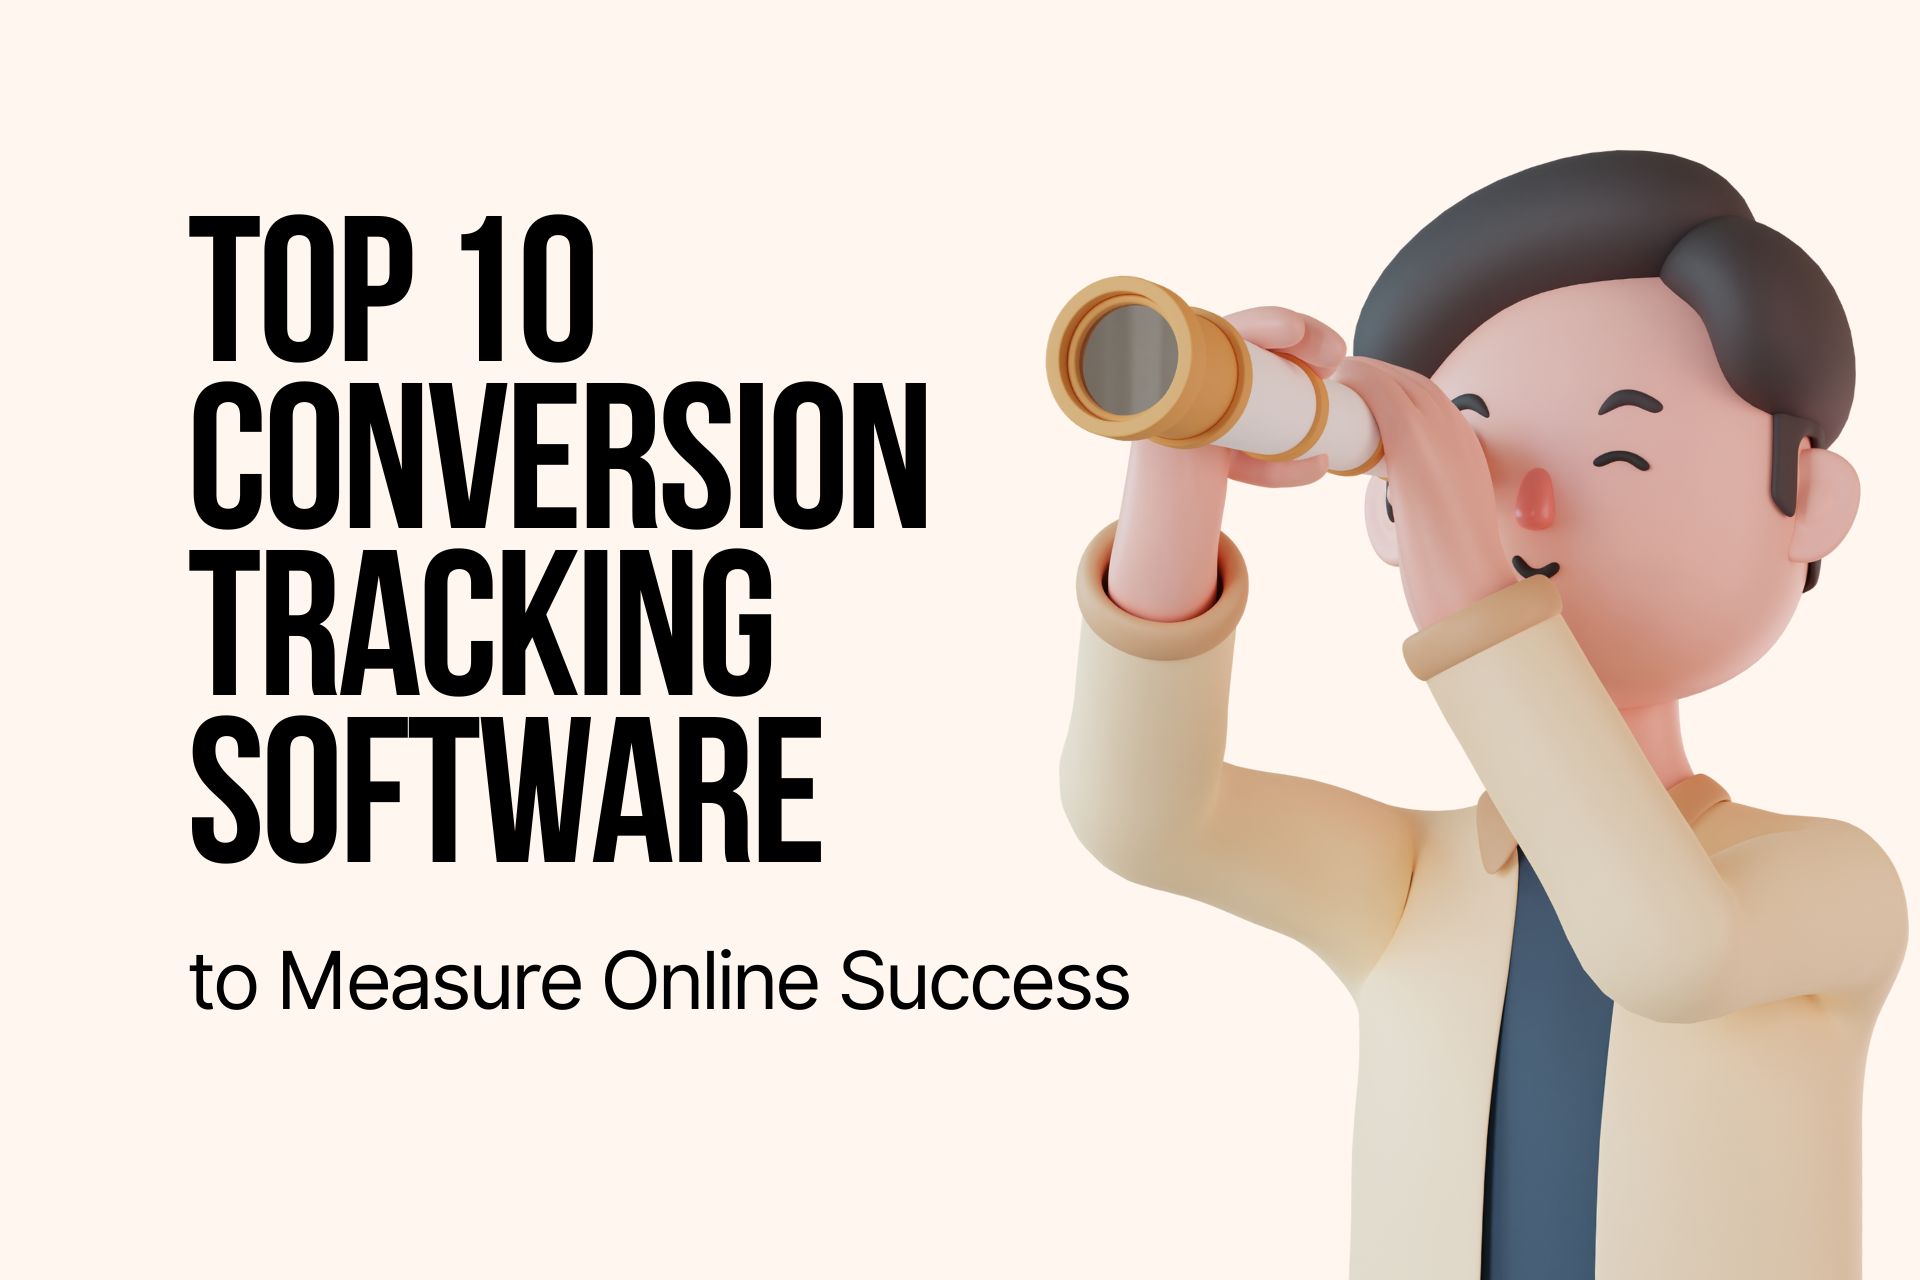 Top 10 Conversion Tracking Software to Measure Online Success